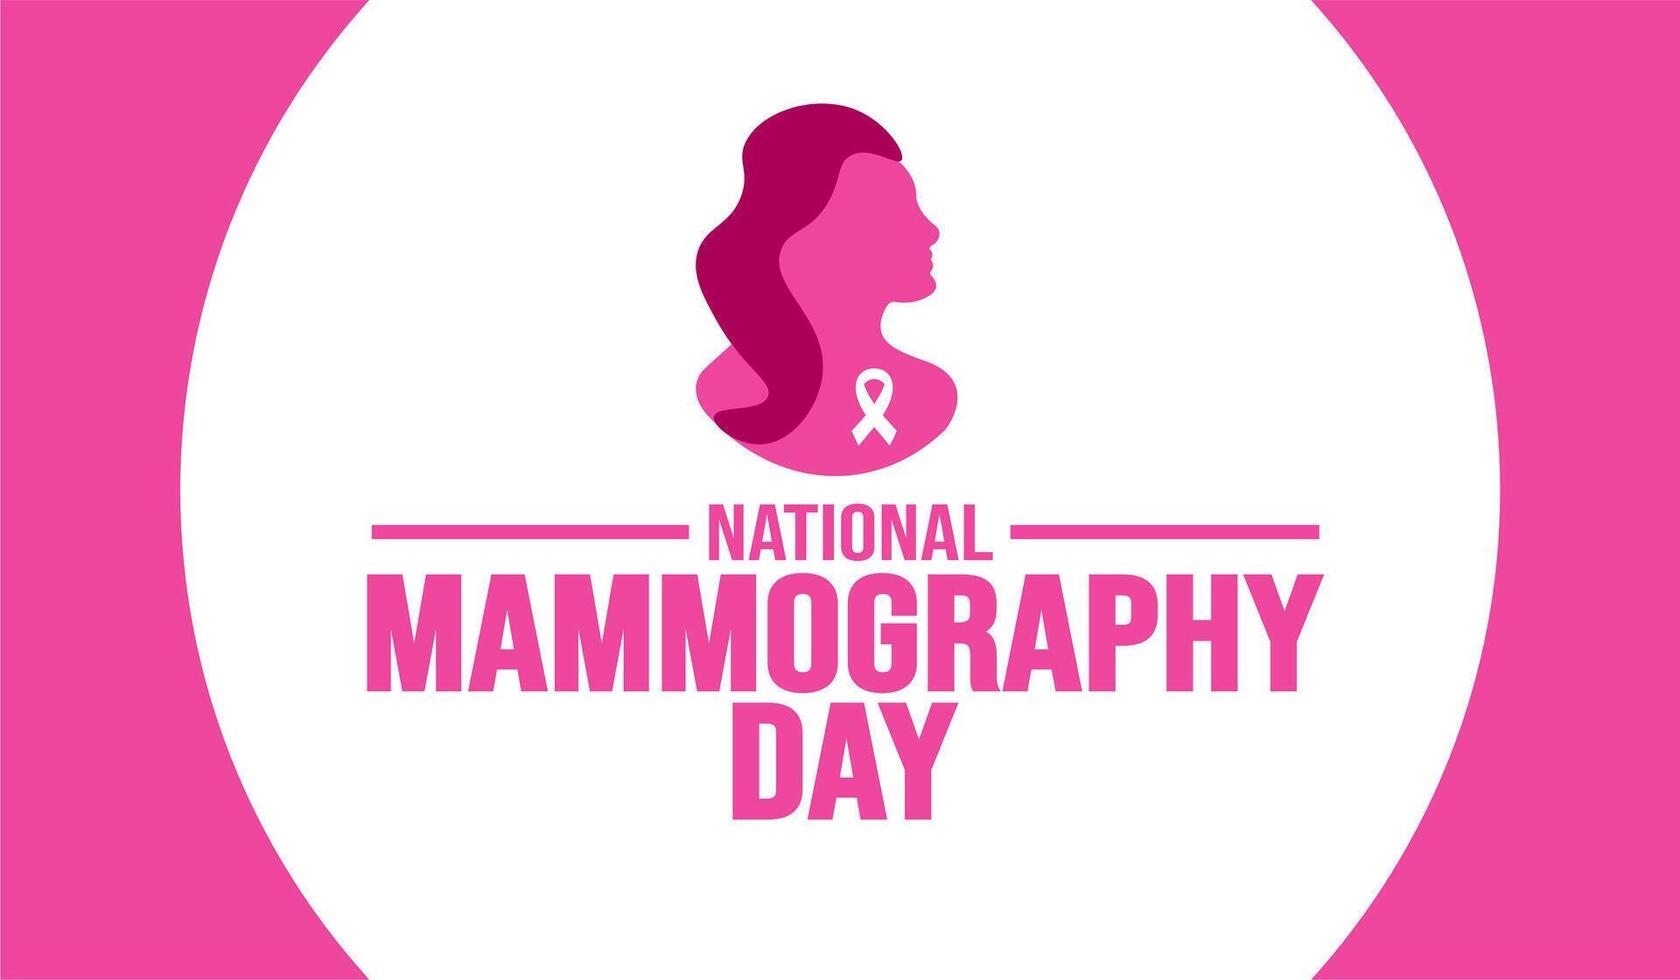 October is National Mammography Day background template. Holiday concept. background, banner, placard, card, and poster design template with text inscription and standard color. vector illustration.